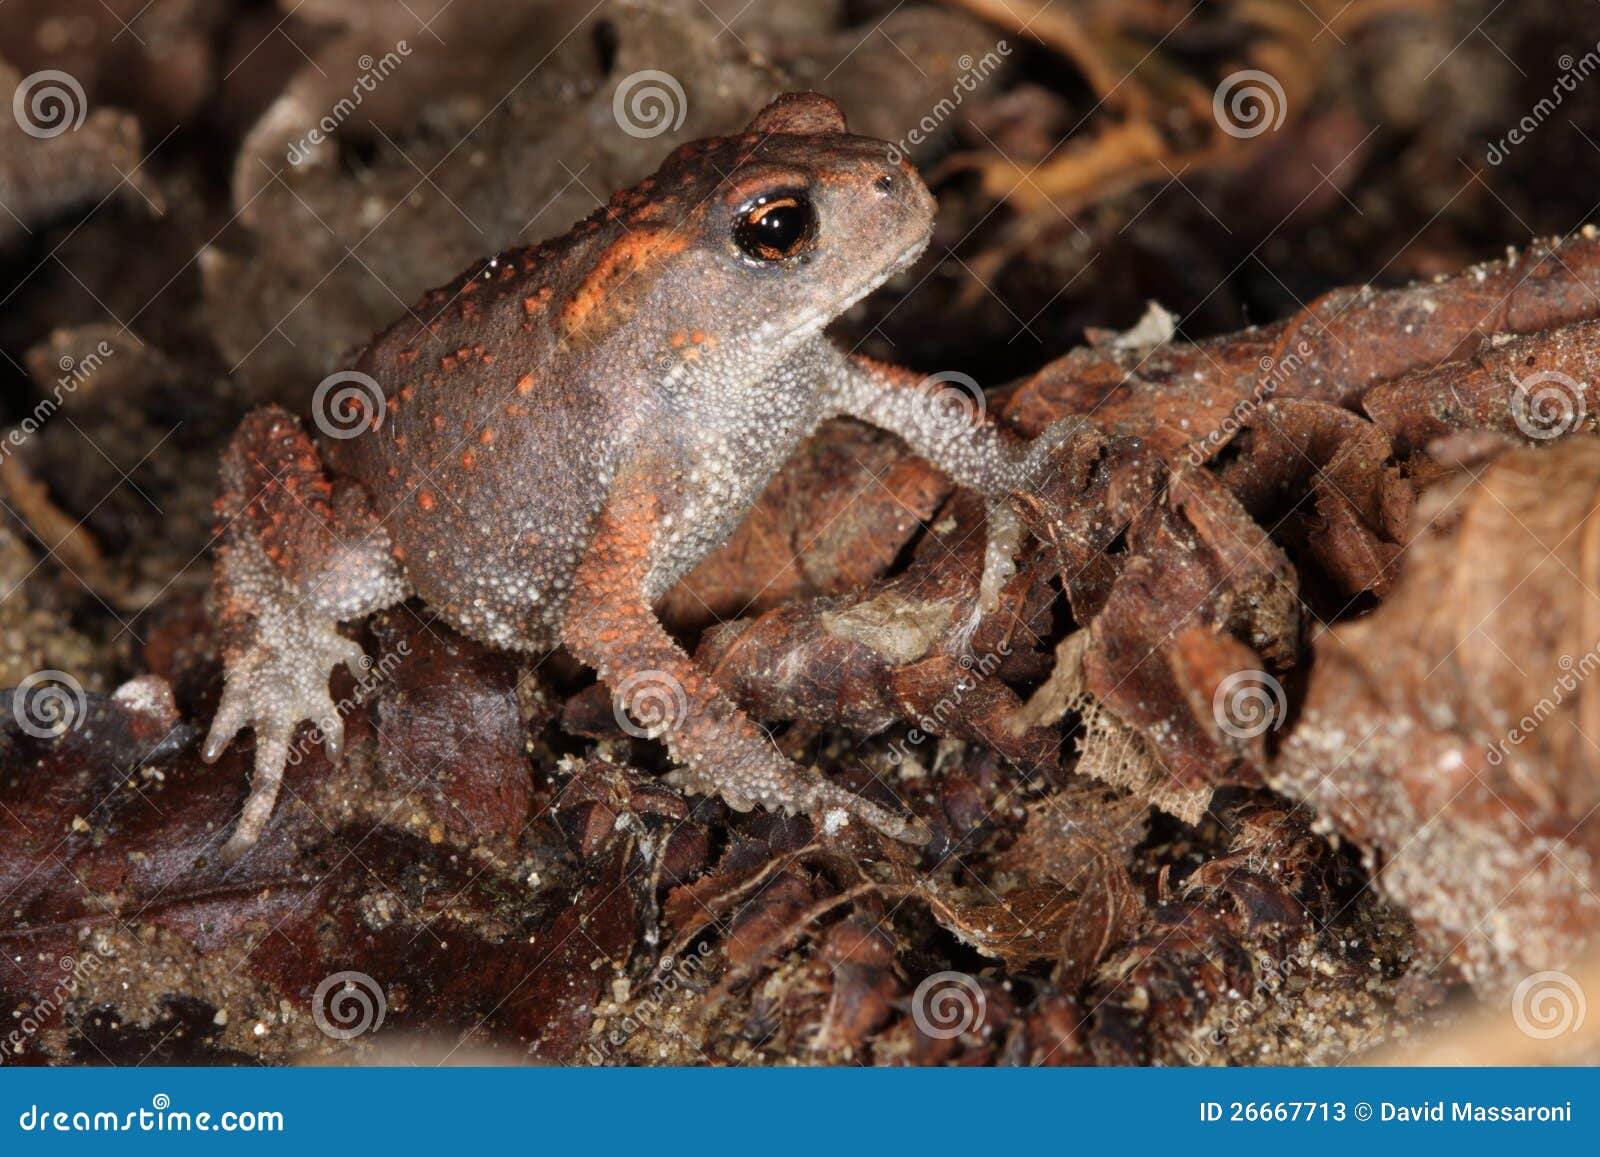 young toad